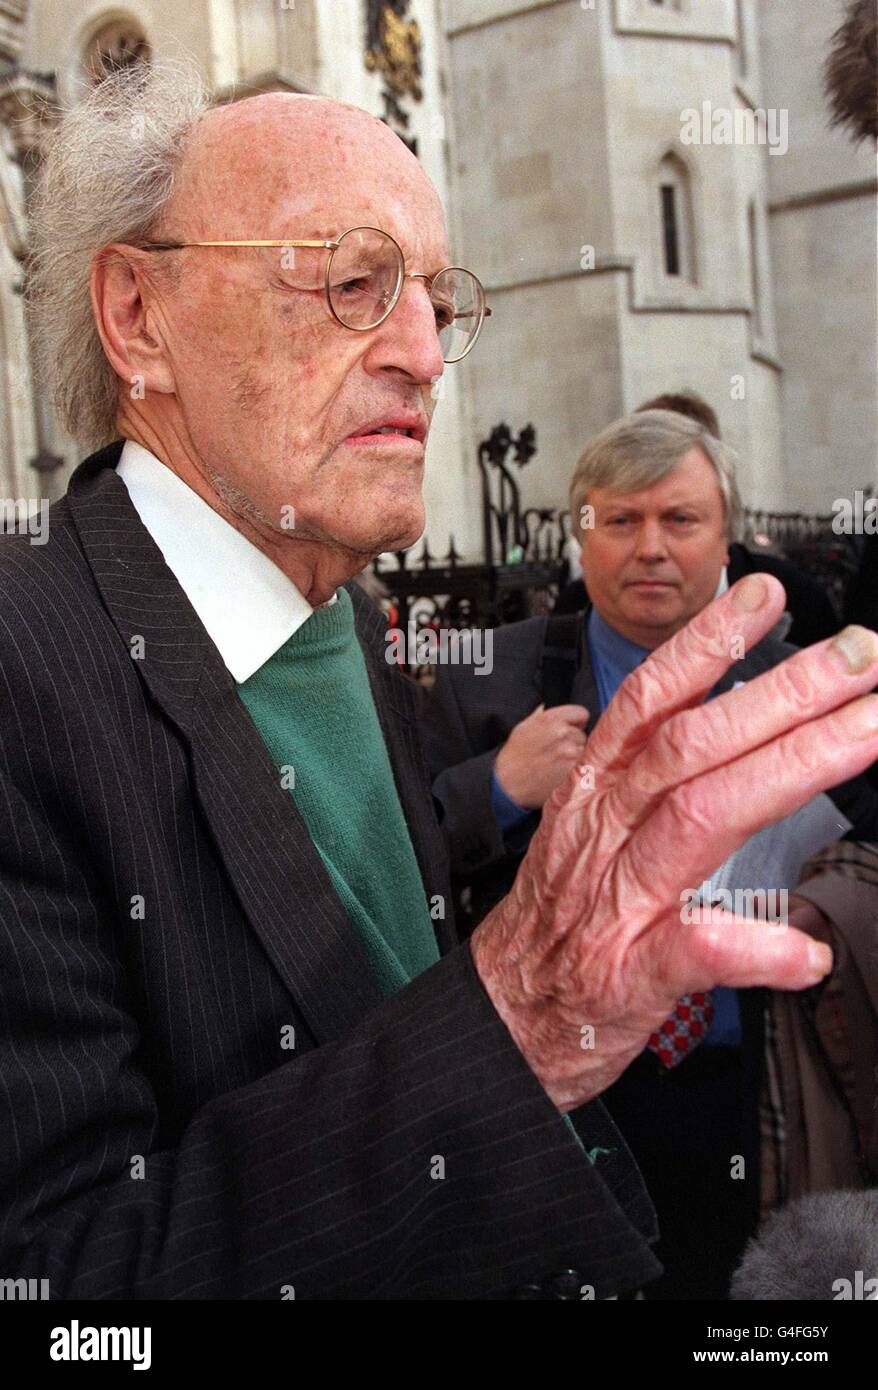 Labour peer and long-time champion of Myra Hindley's cause, Lord Longford, outside London's Court of Appleal this morning (Thursday) after the Court of Appeal refused to overturn Home Secretary Jack Straw's decision that her life sentence 'means life'. Photo by Peter J Jordan/PA. See PA story COURTS Hindley Stock Photo